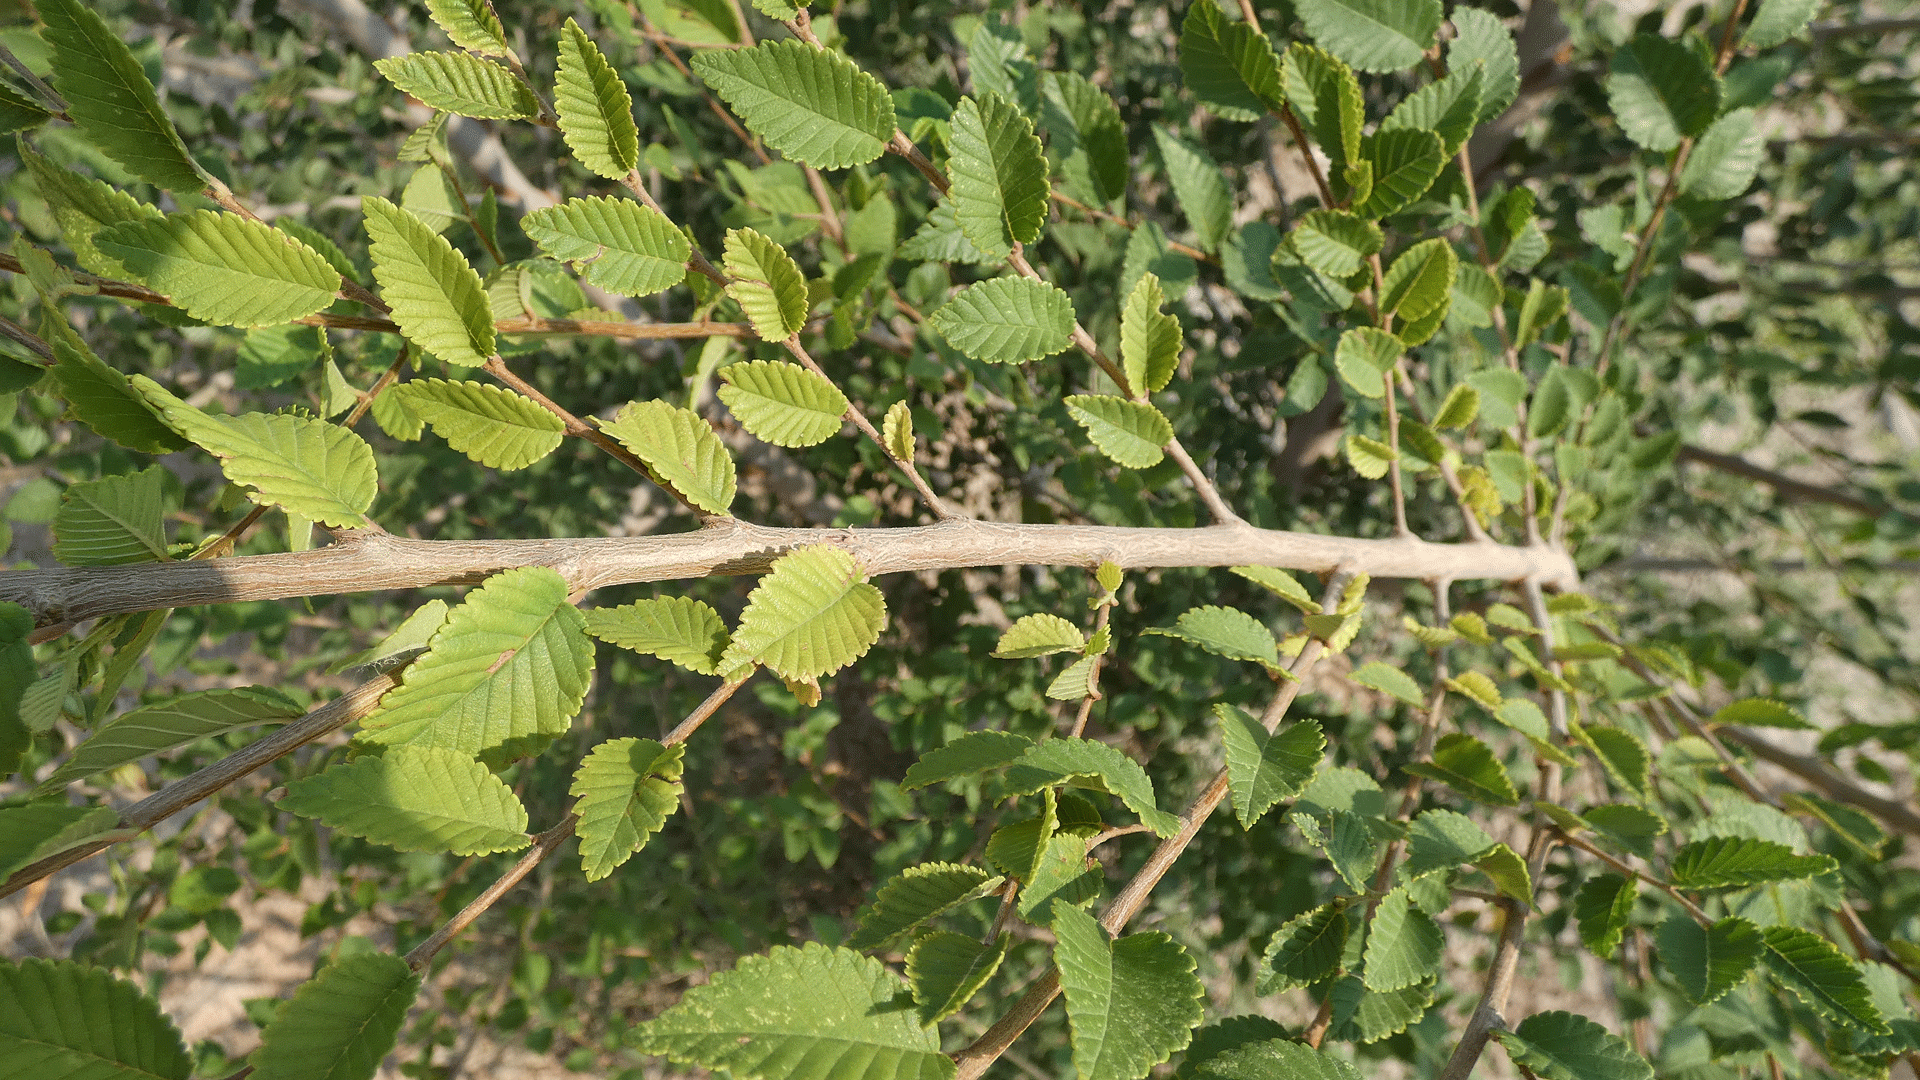 Branch and leaves, Albuquerque, August 2020